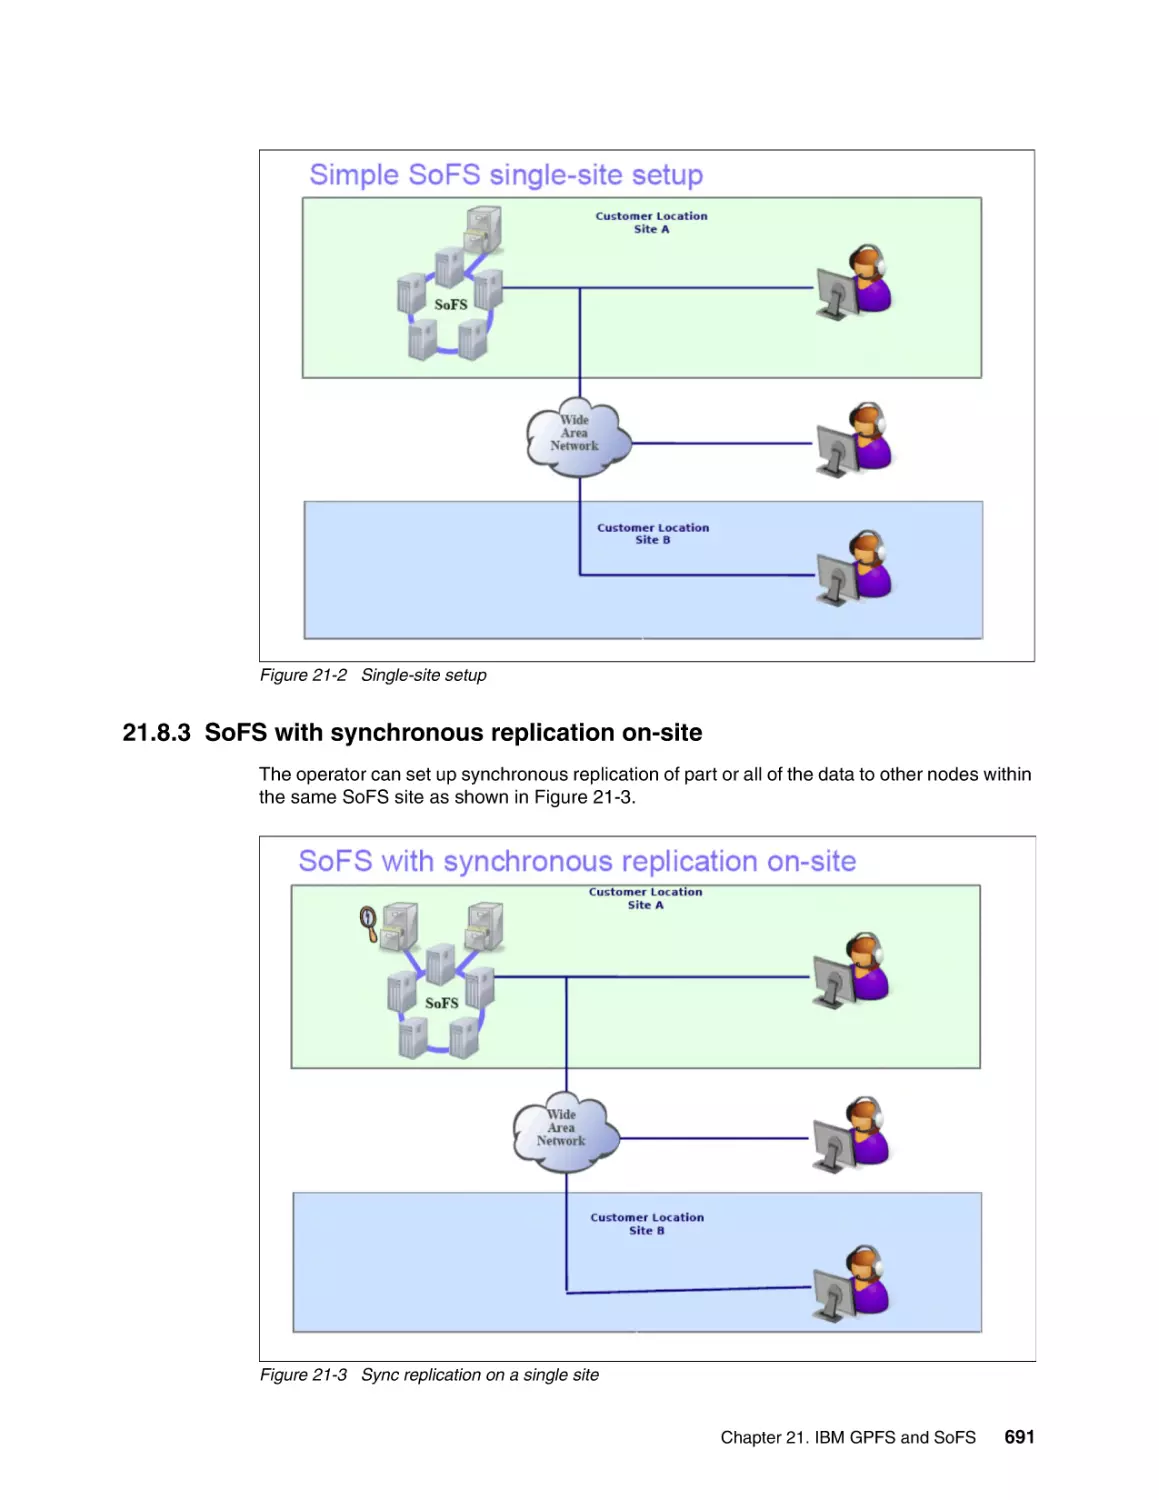 21.8.3 SoFS with synchronous replication on-site